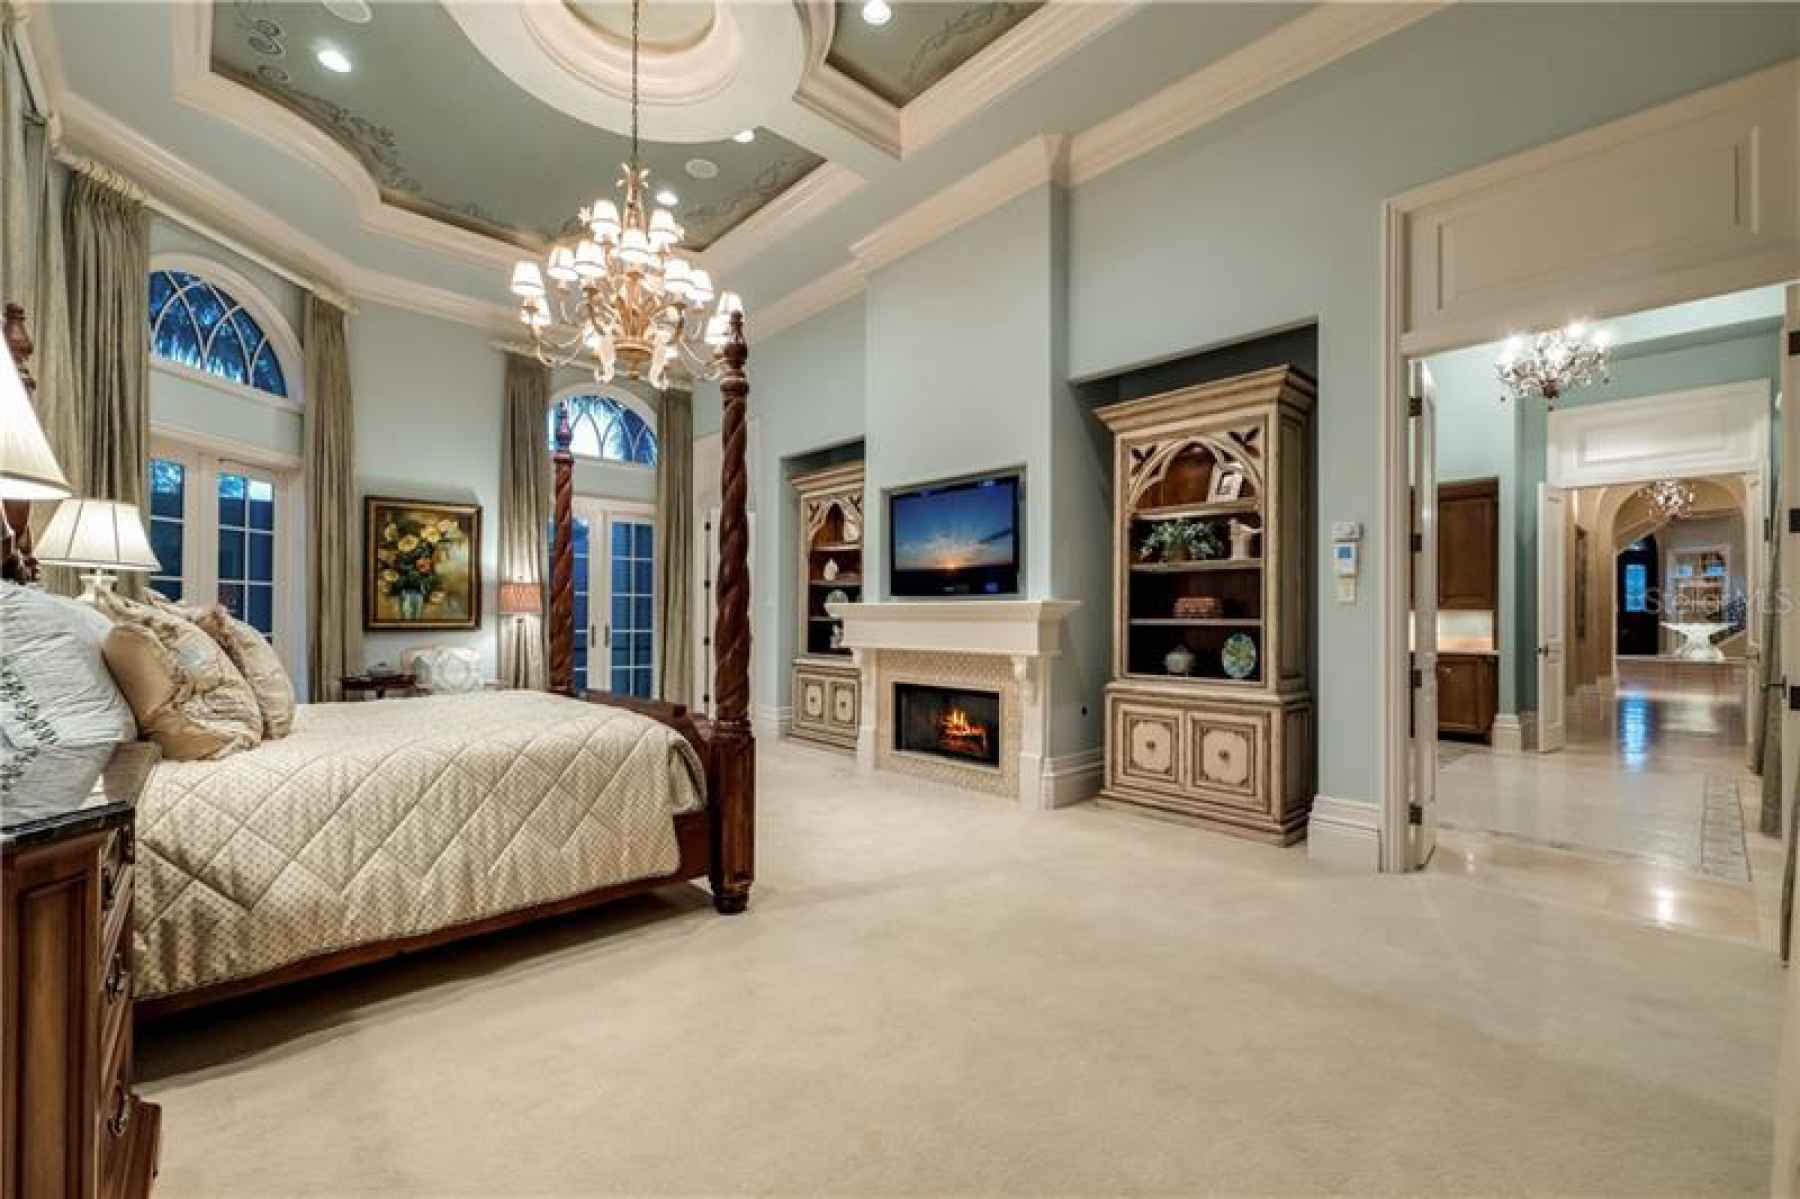 Master Bedroom with Gas Fireplace